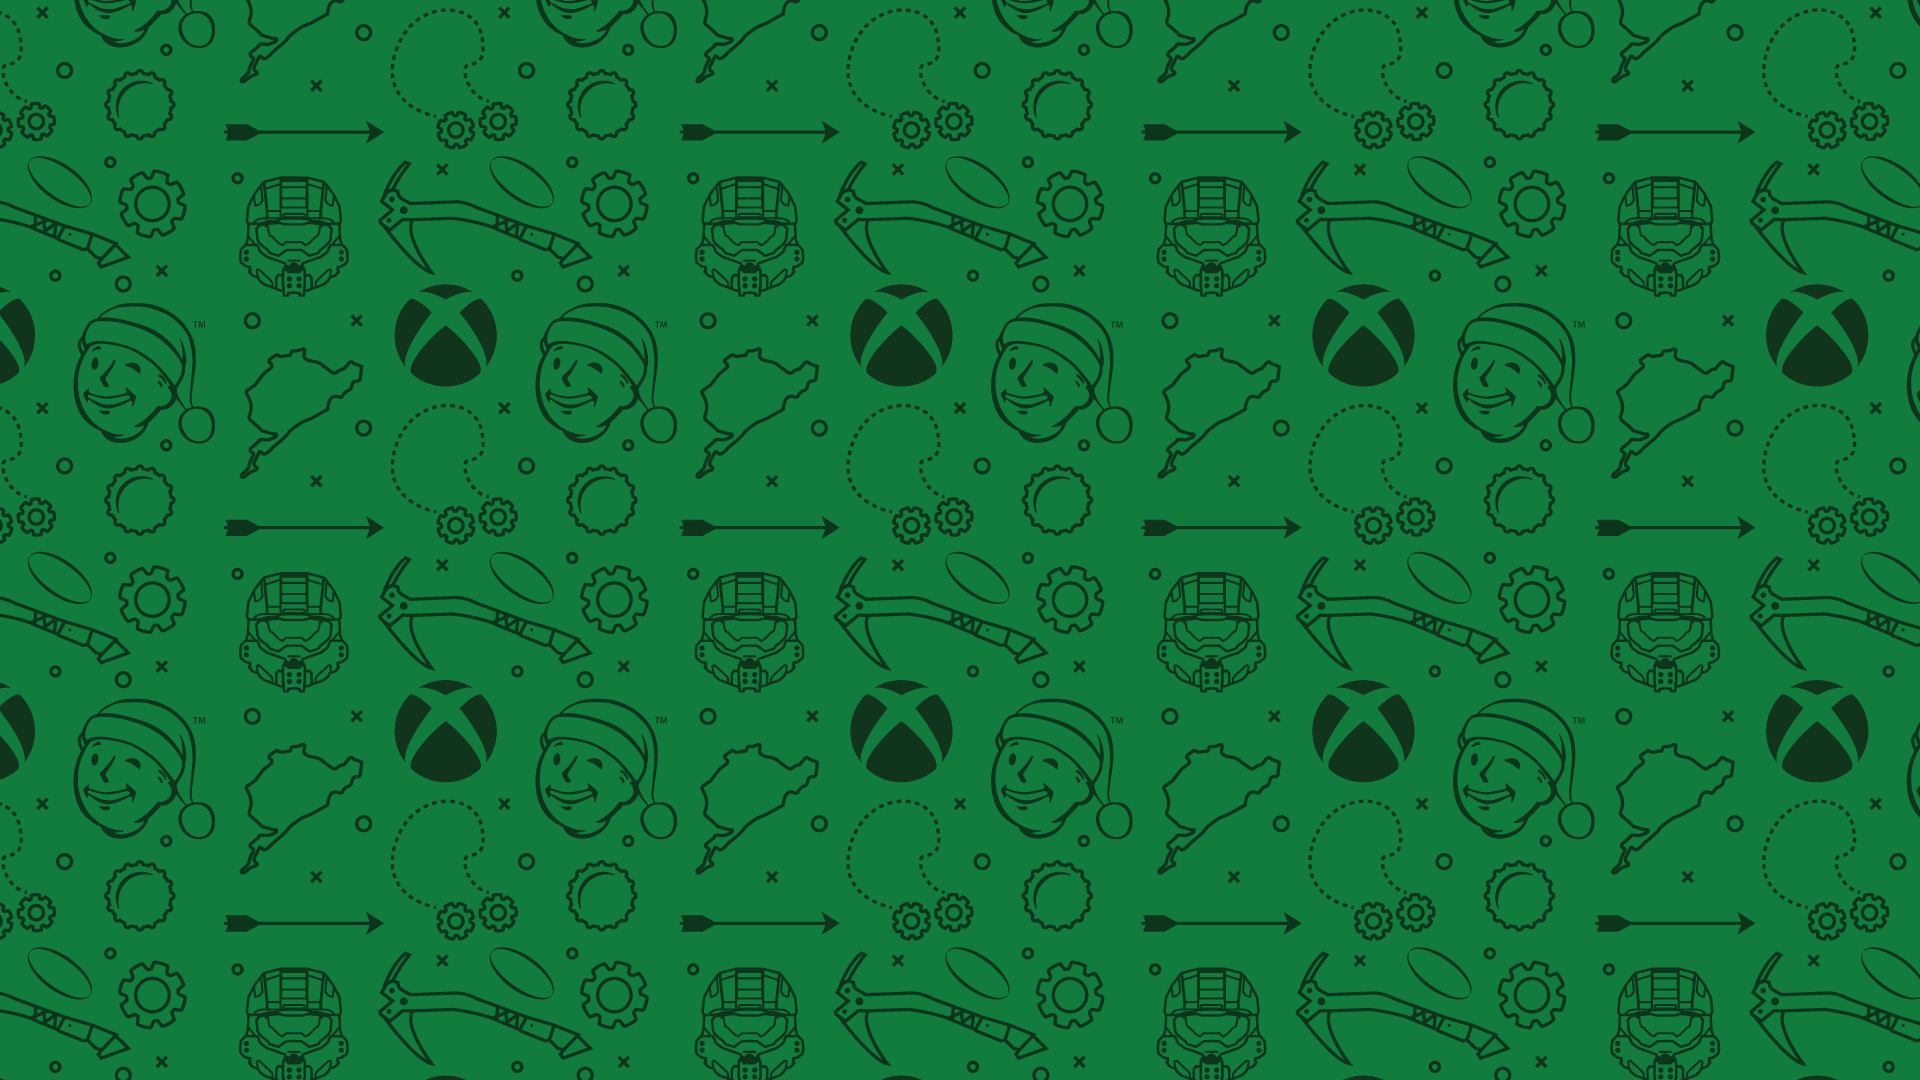 Check Out These Awesome Festive Themed Wallpaper For Your Xbox One